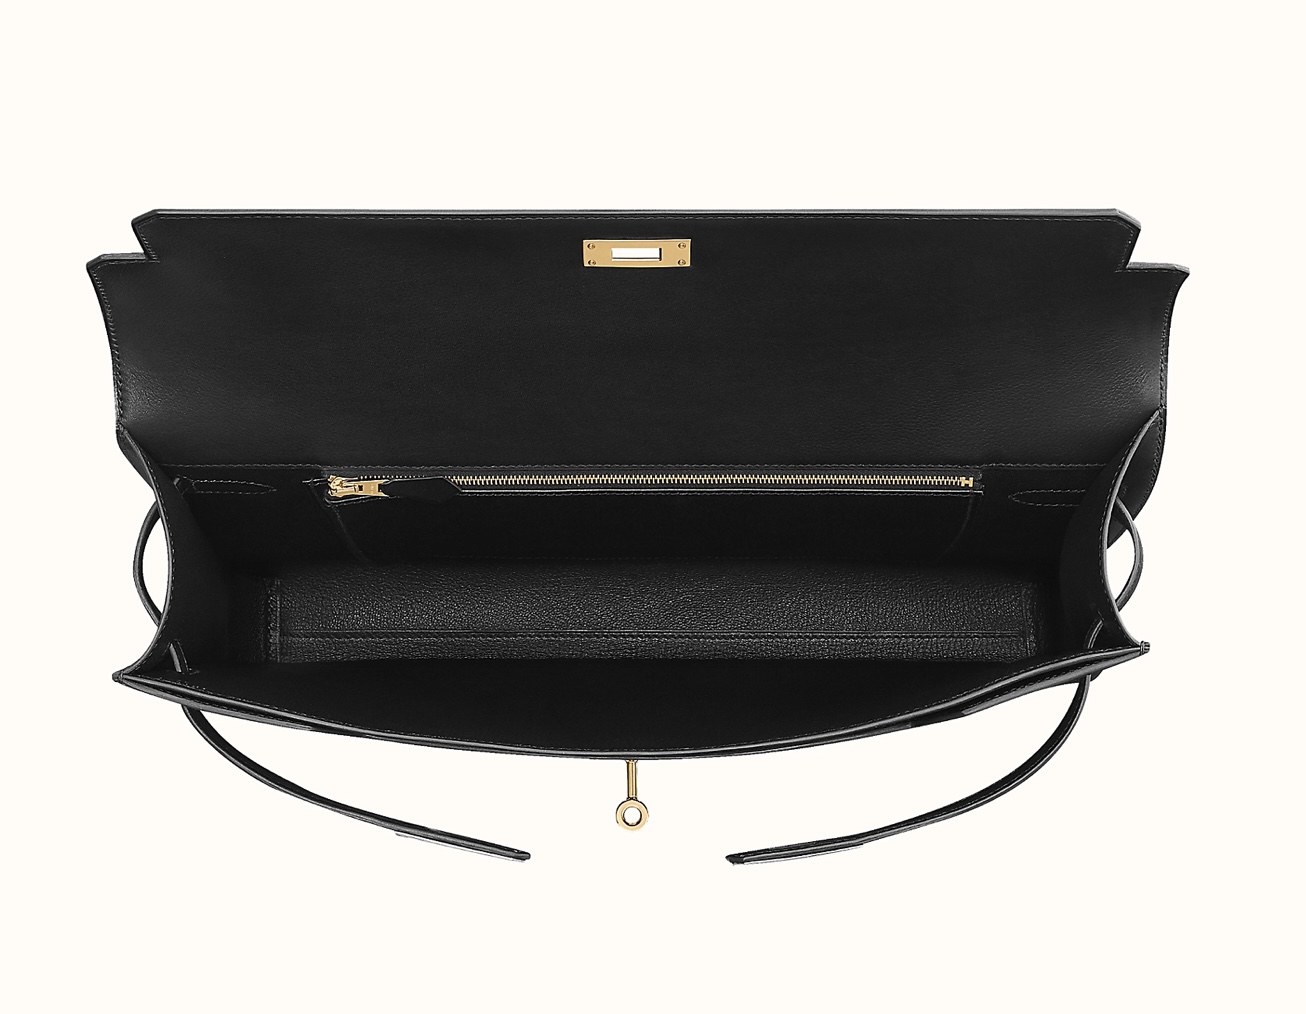 Interior View of the Kelly Dépêches 36 Touch Briefcase in Noir. Photo via Hermes.com